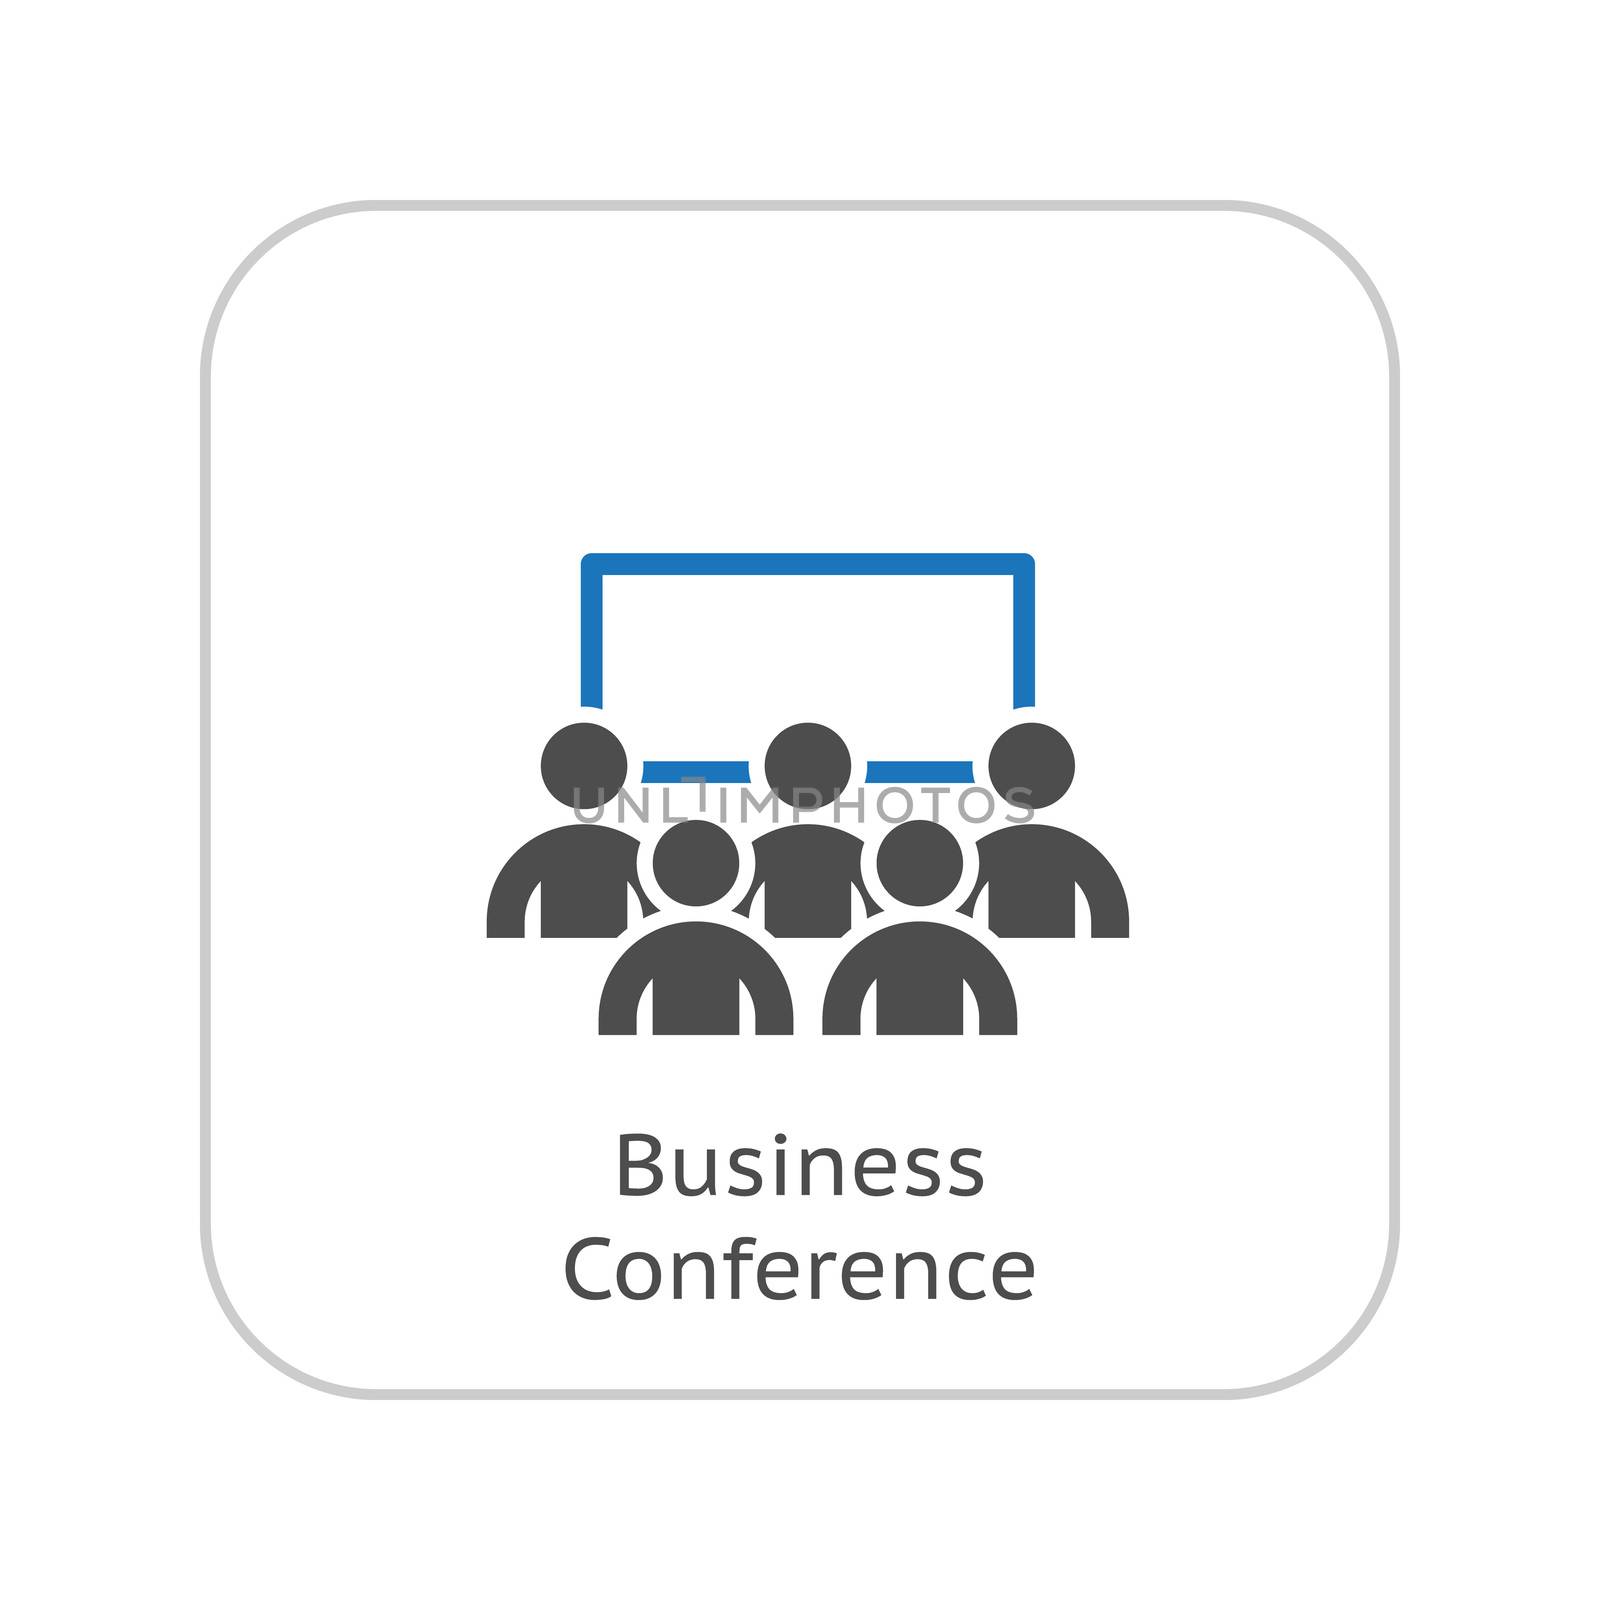 Business Conference Icon. Online Learning. Flat Design. Isolated Illustration.